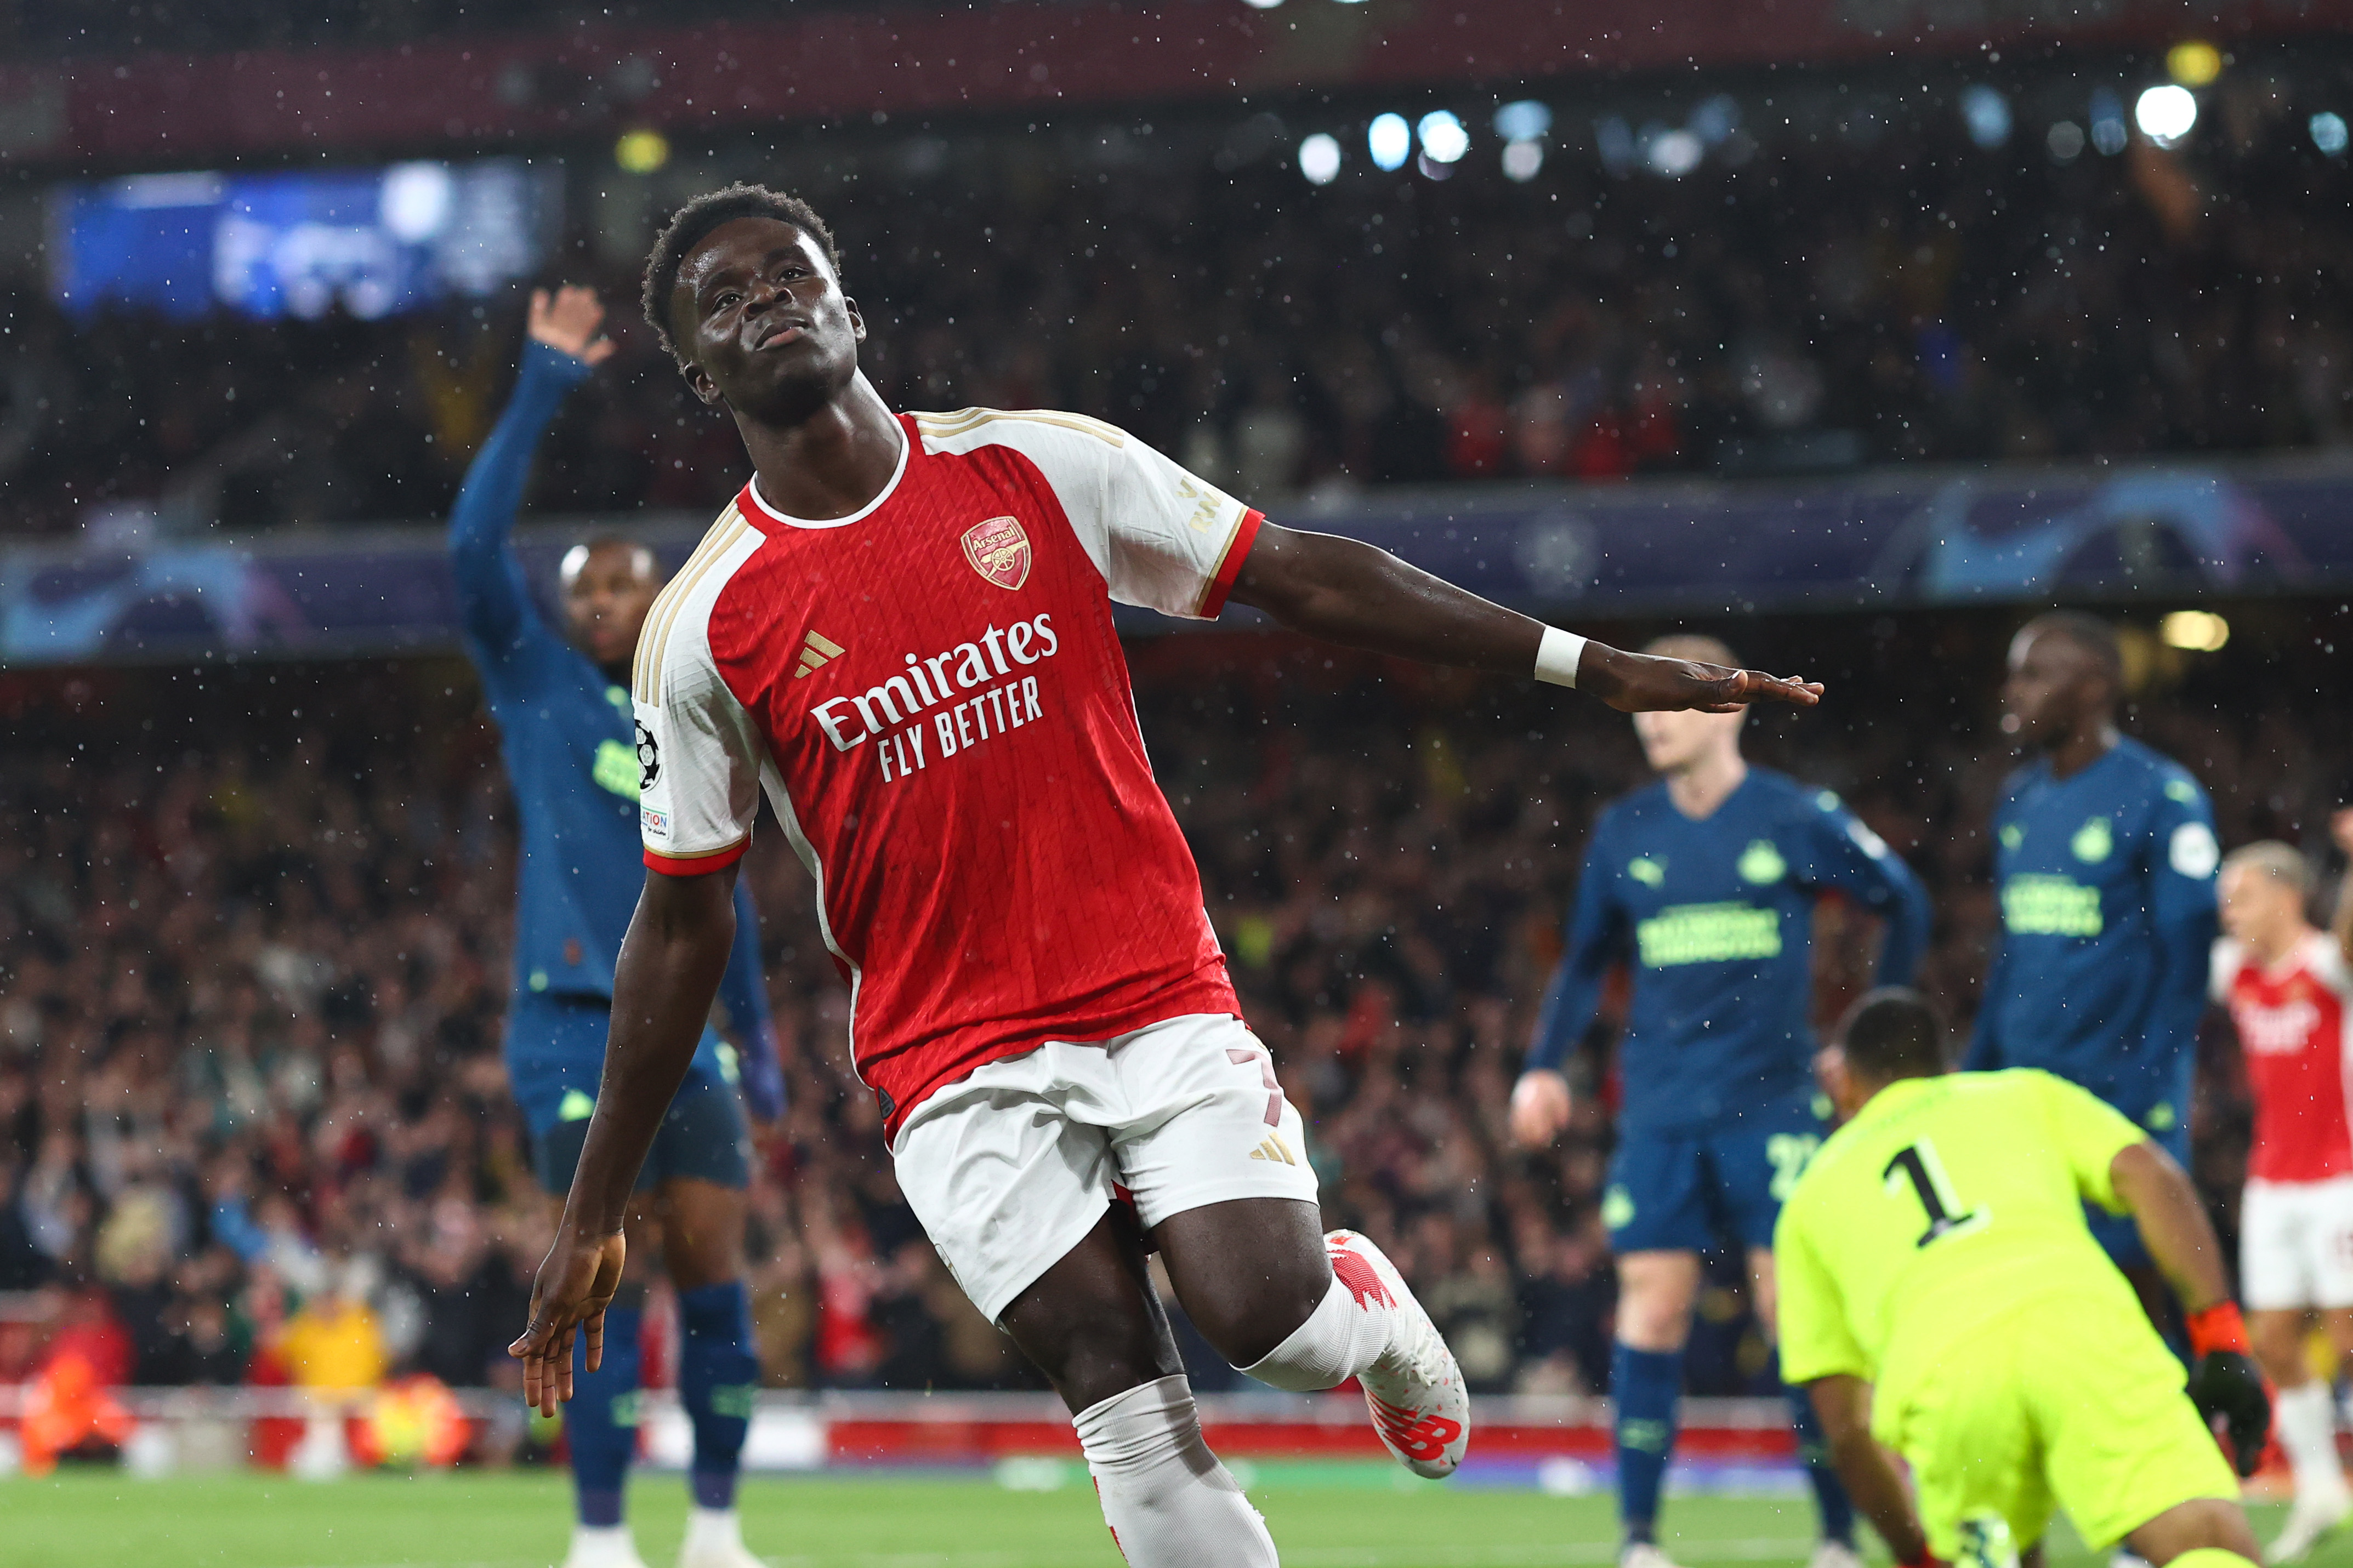 Champions League: Lens vs Arsenal - All You Need to Know including kick-off time, TV coverage and live stream details